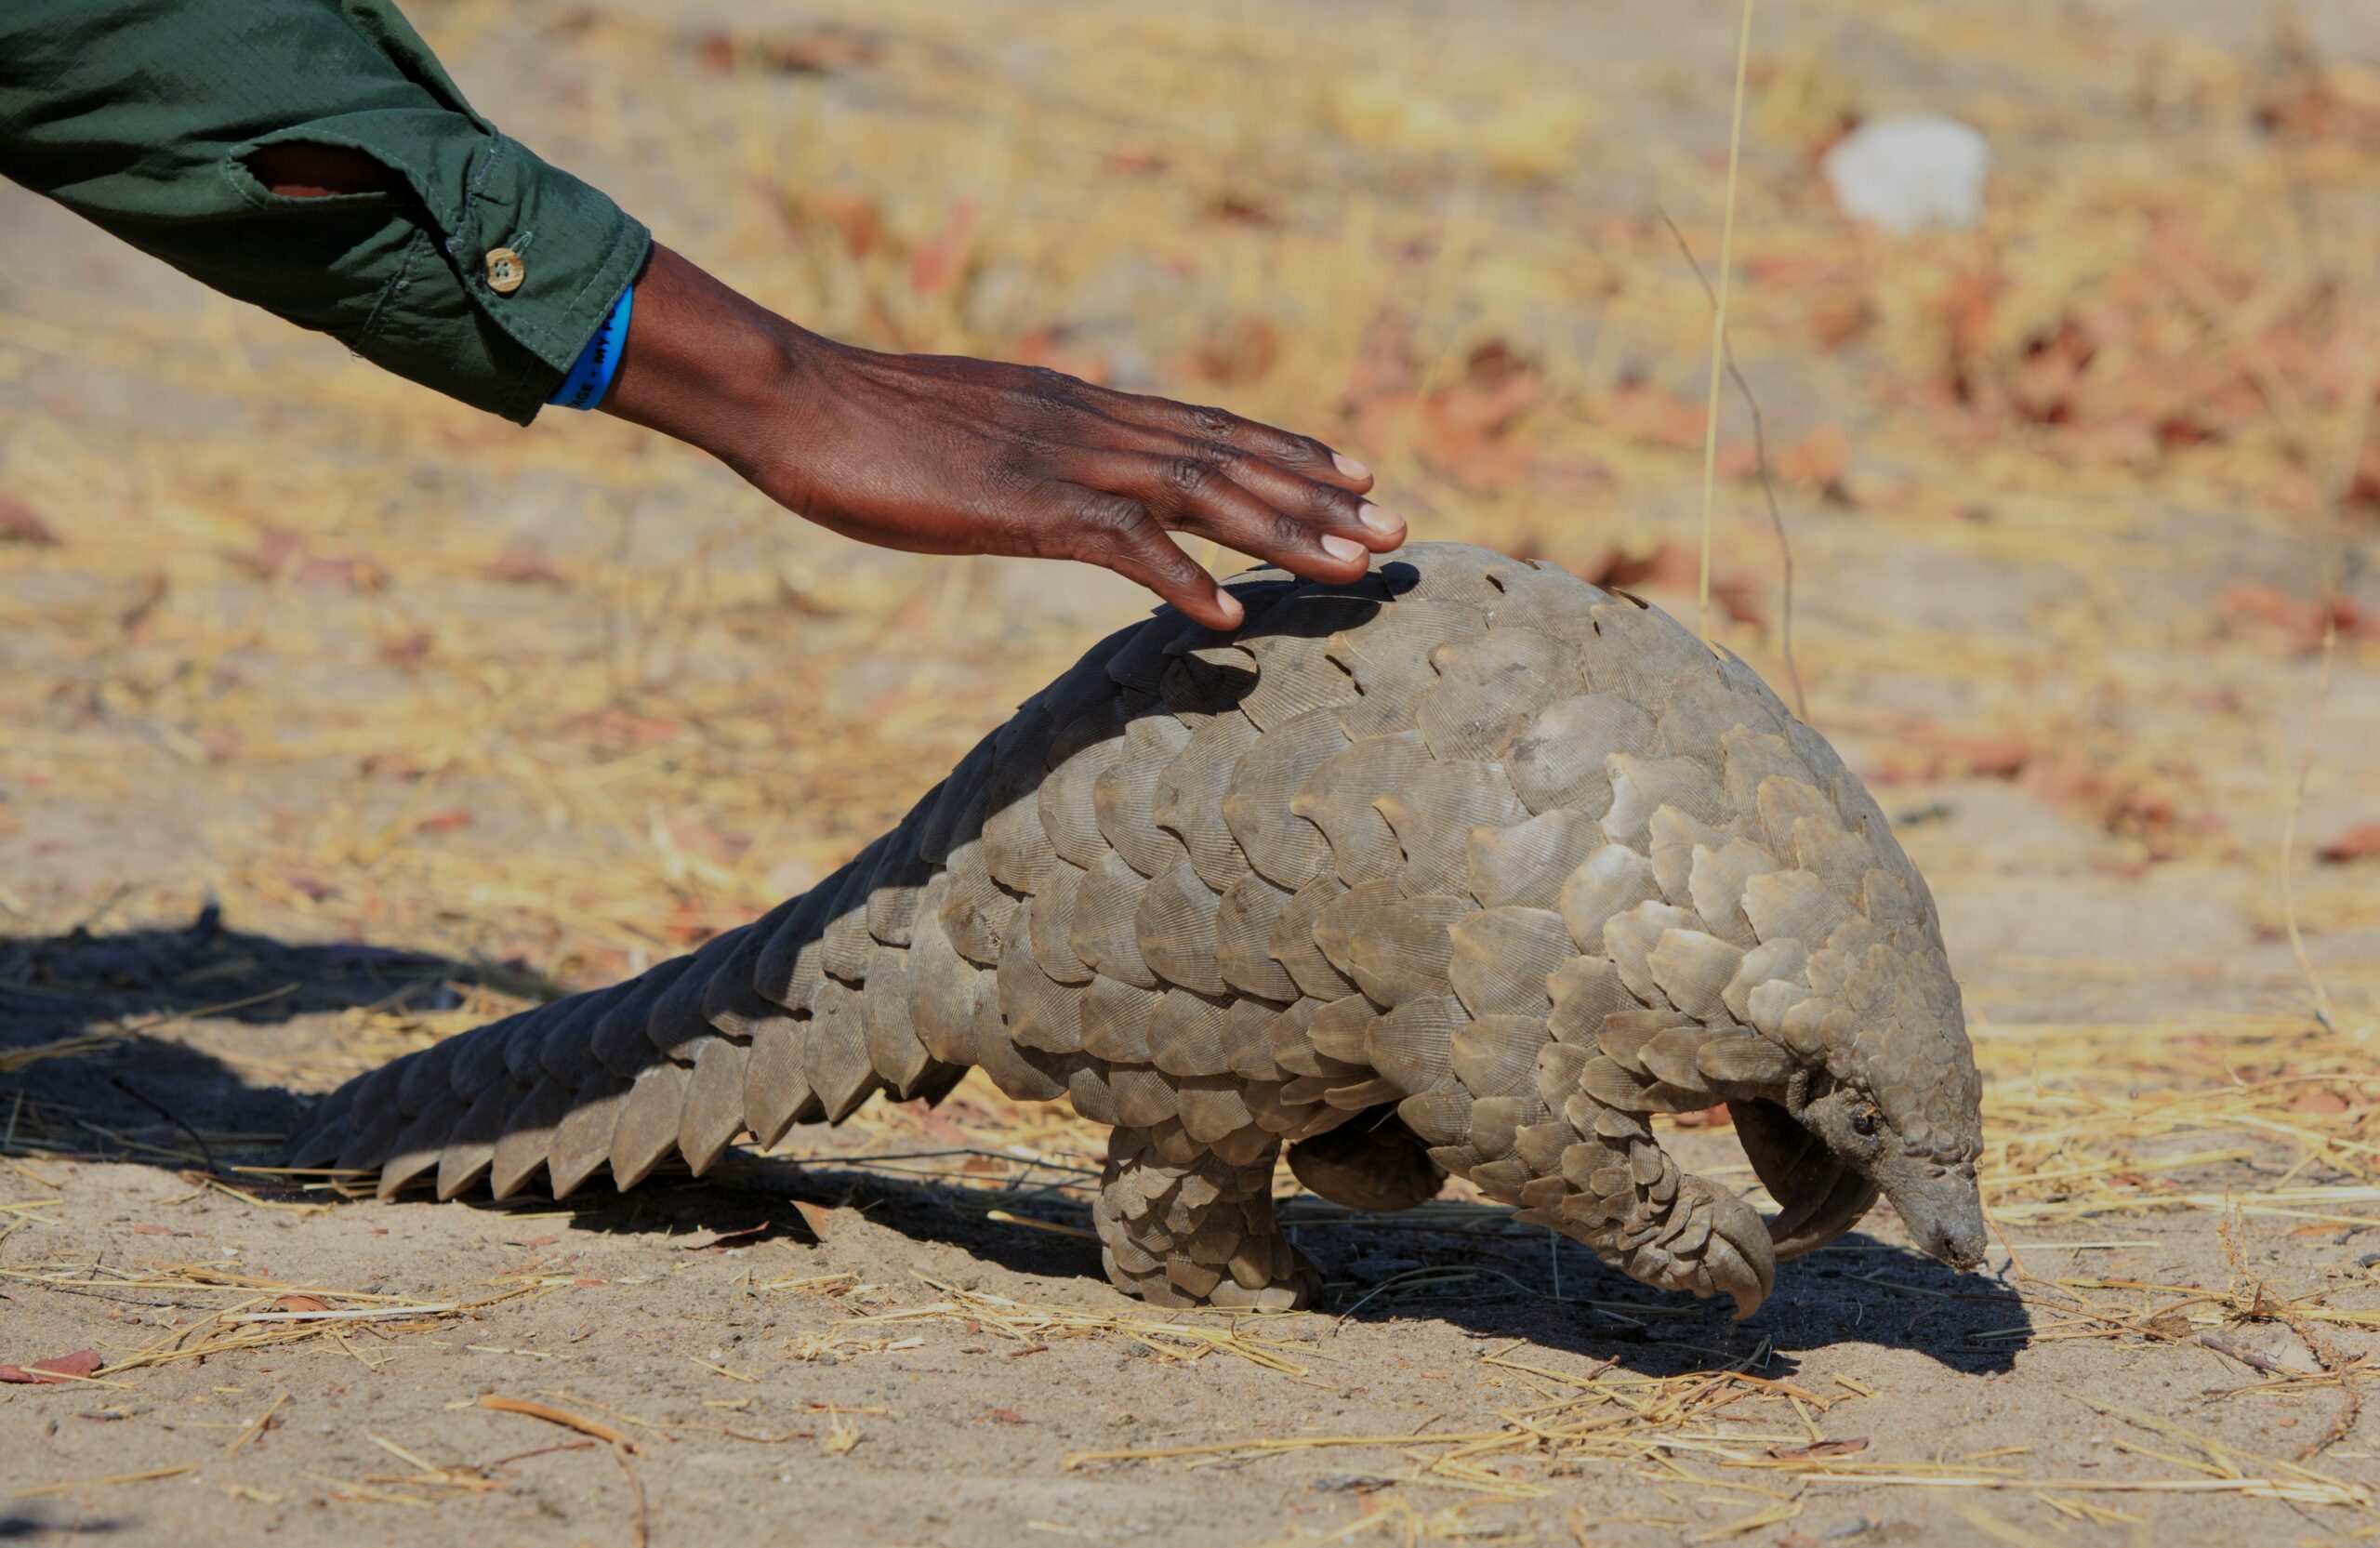 Protecting Pangolins in Southern Africa - Pelorus Foundation